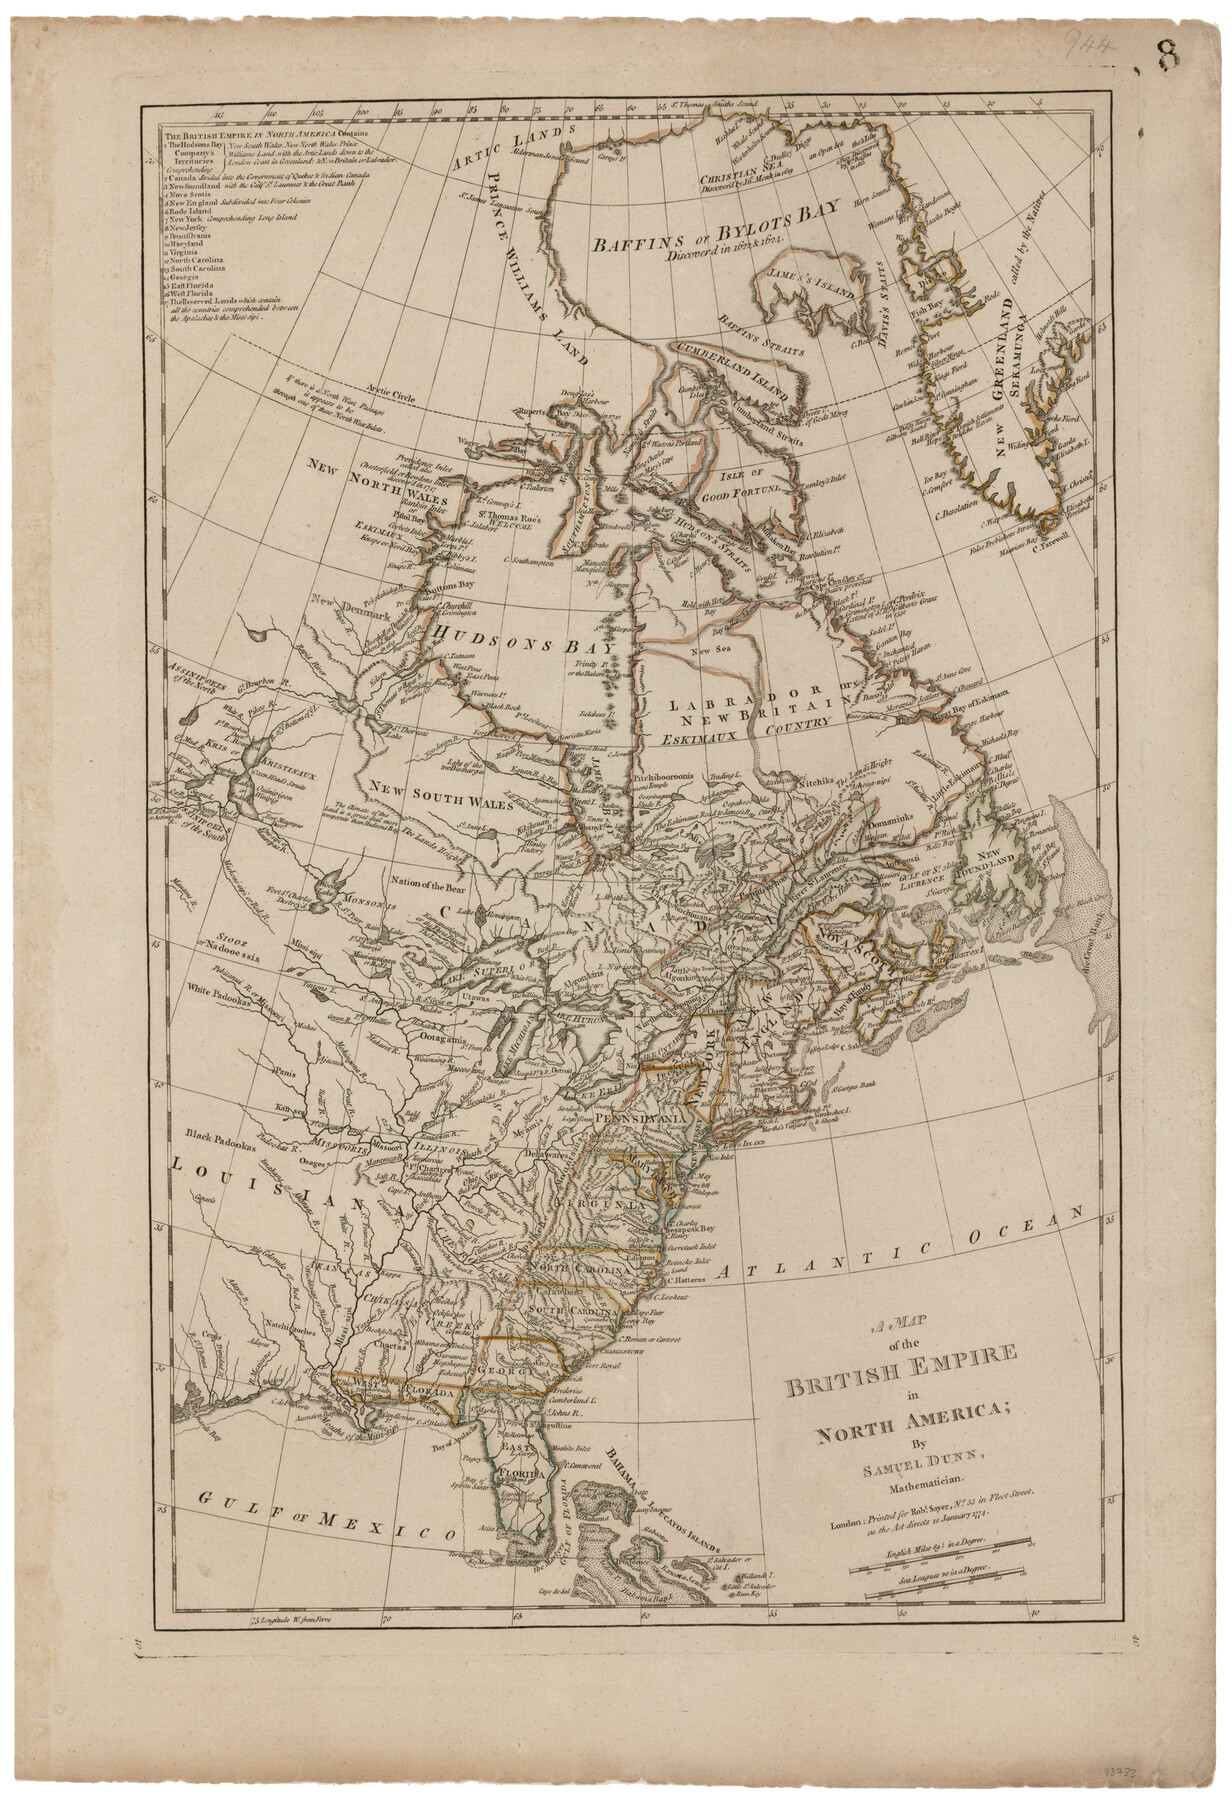 93733, A Map of the British Empire in North America, General Map Collection